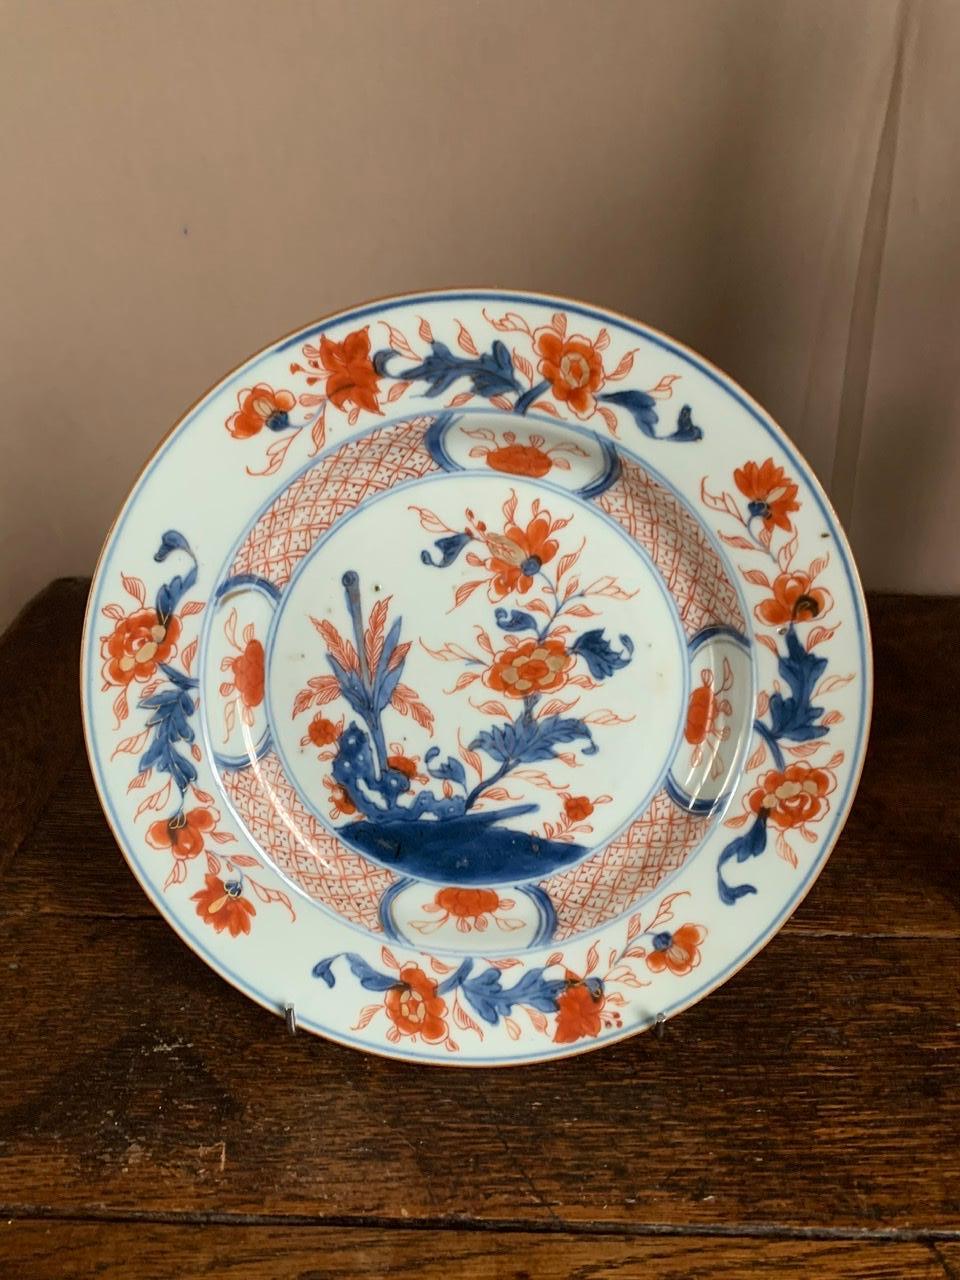 Beautiful Chinese porcelain plate with imari decoration. On this plate, the background is white, there is a blue outline, with blue and red floral decorations. Imari porcelain is actually a Japanese porcelain production site on the island of Kyushu,